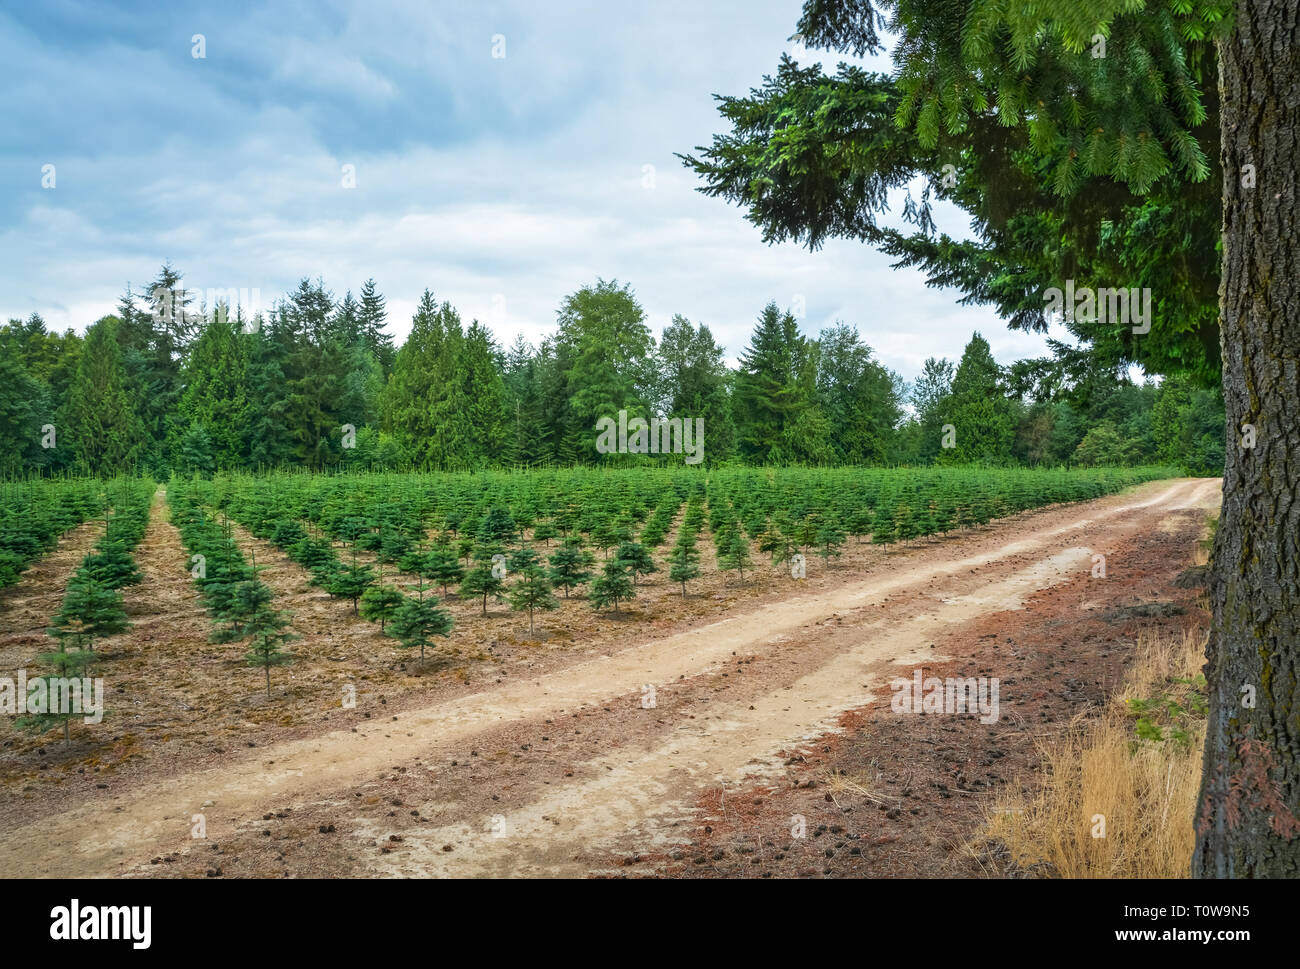 Planting stock of pine trees at the road. Stock Photo